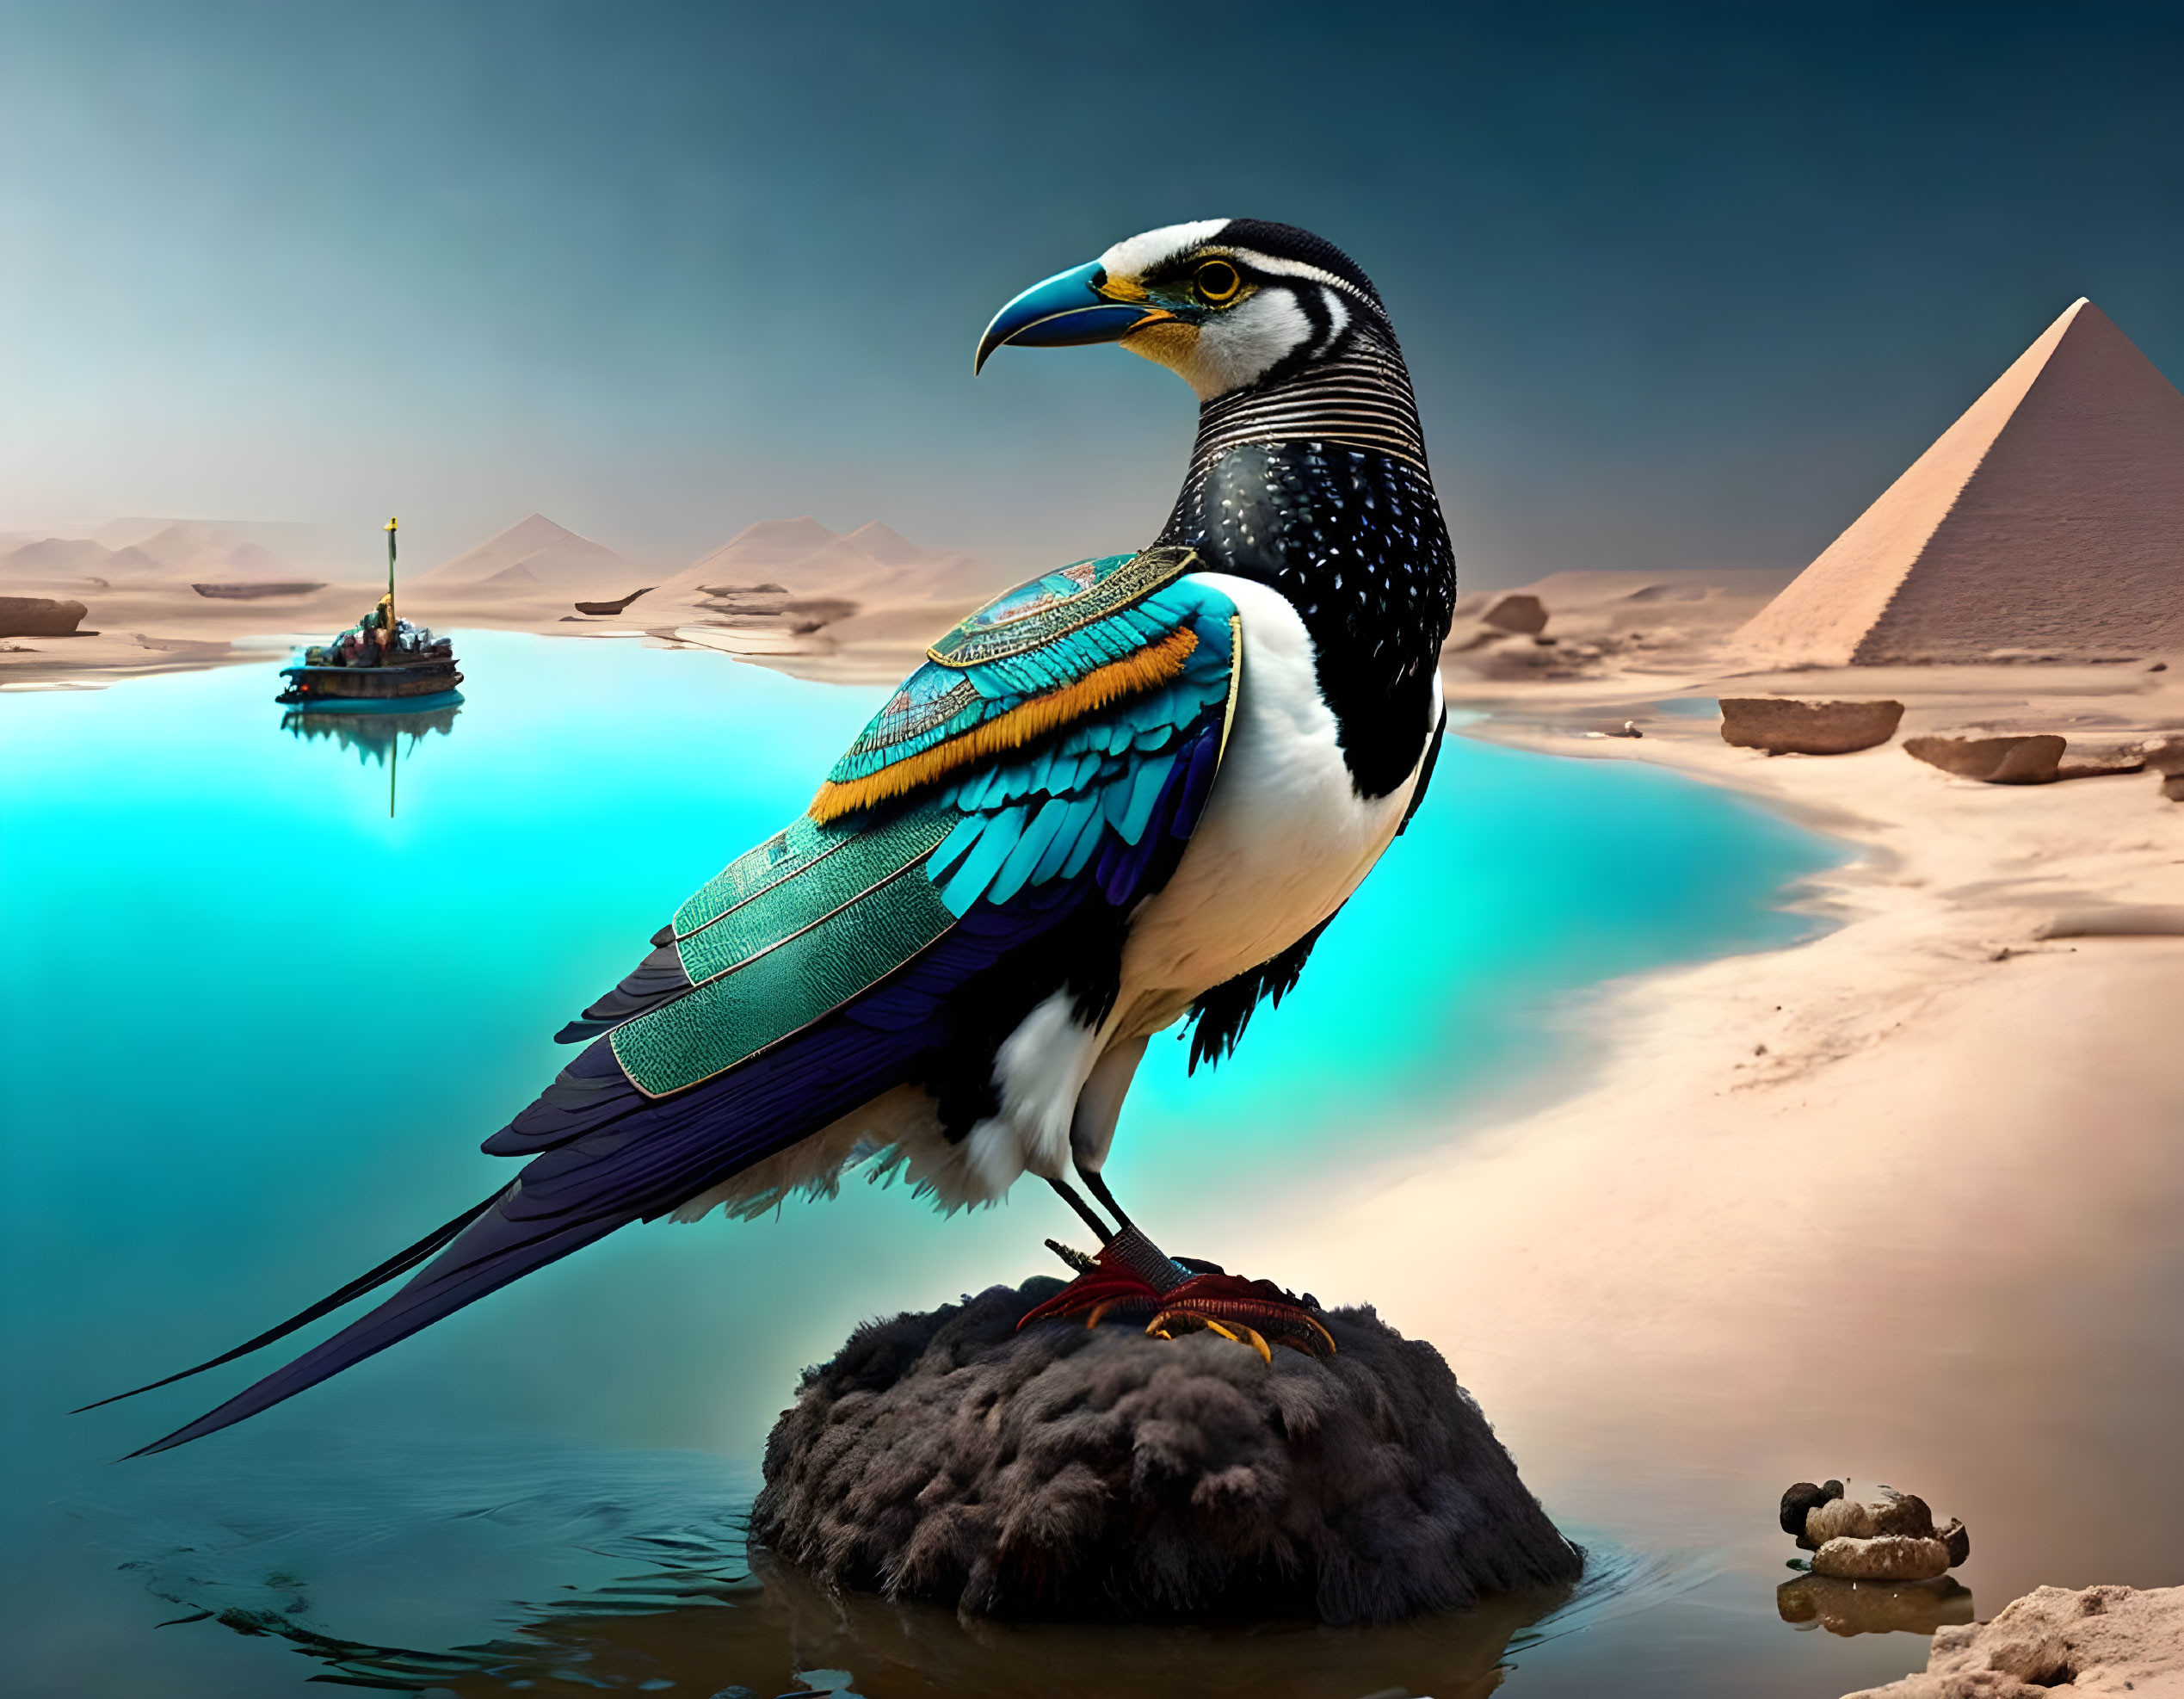 Colorful bird with toucan-like beak by oasis, pyramid, and boat in desert landscape